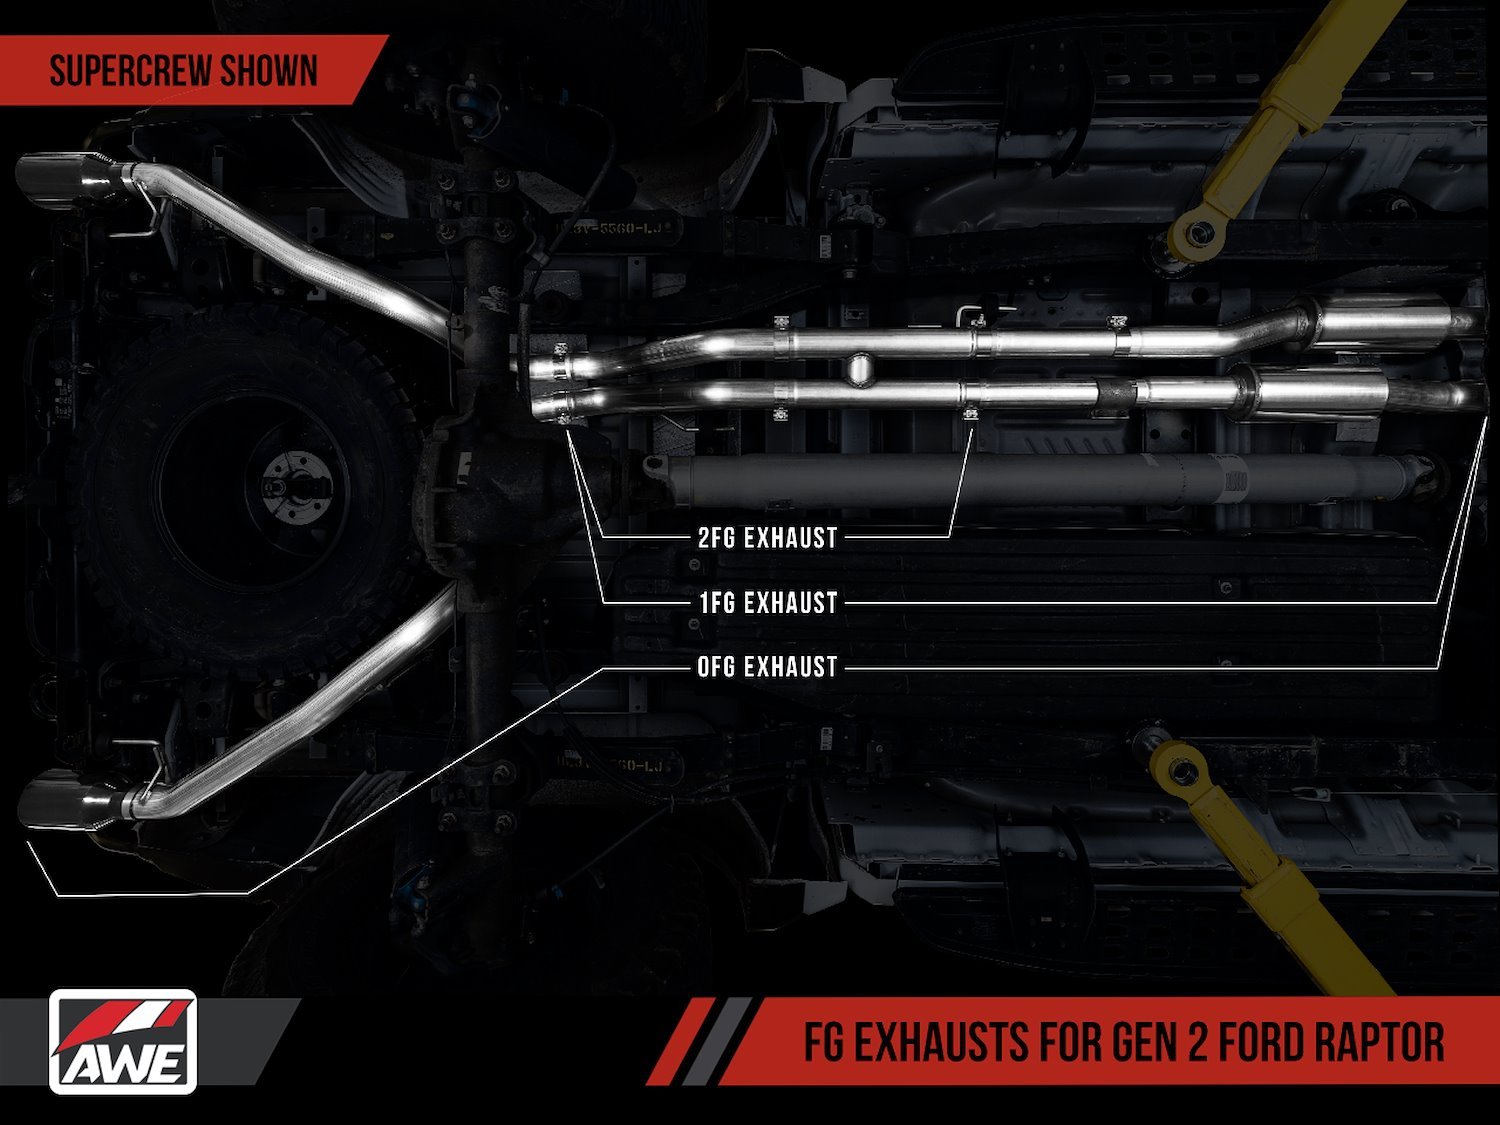 AWE 2FG Exhaust for Gen 2 Ford Raptor